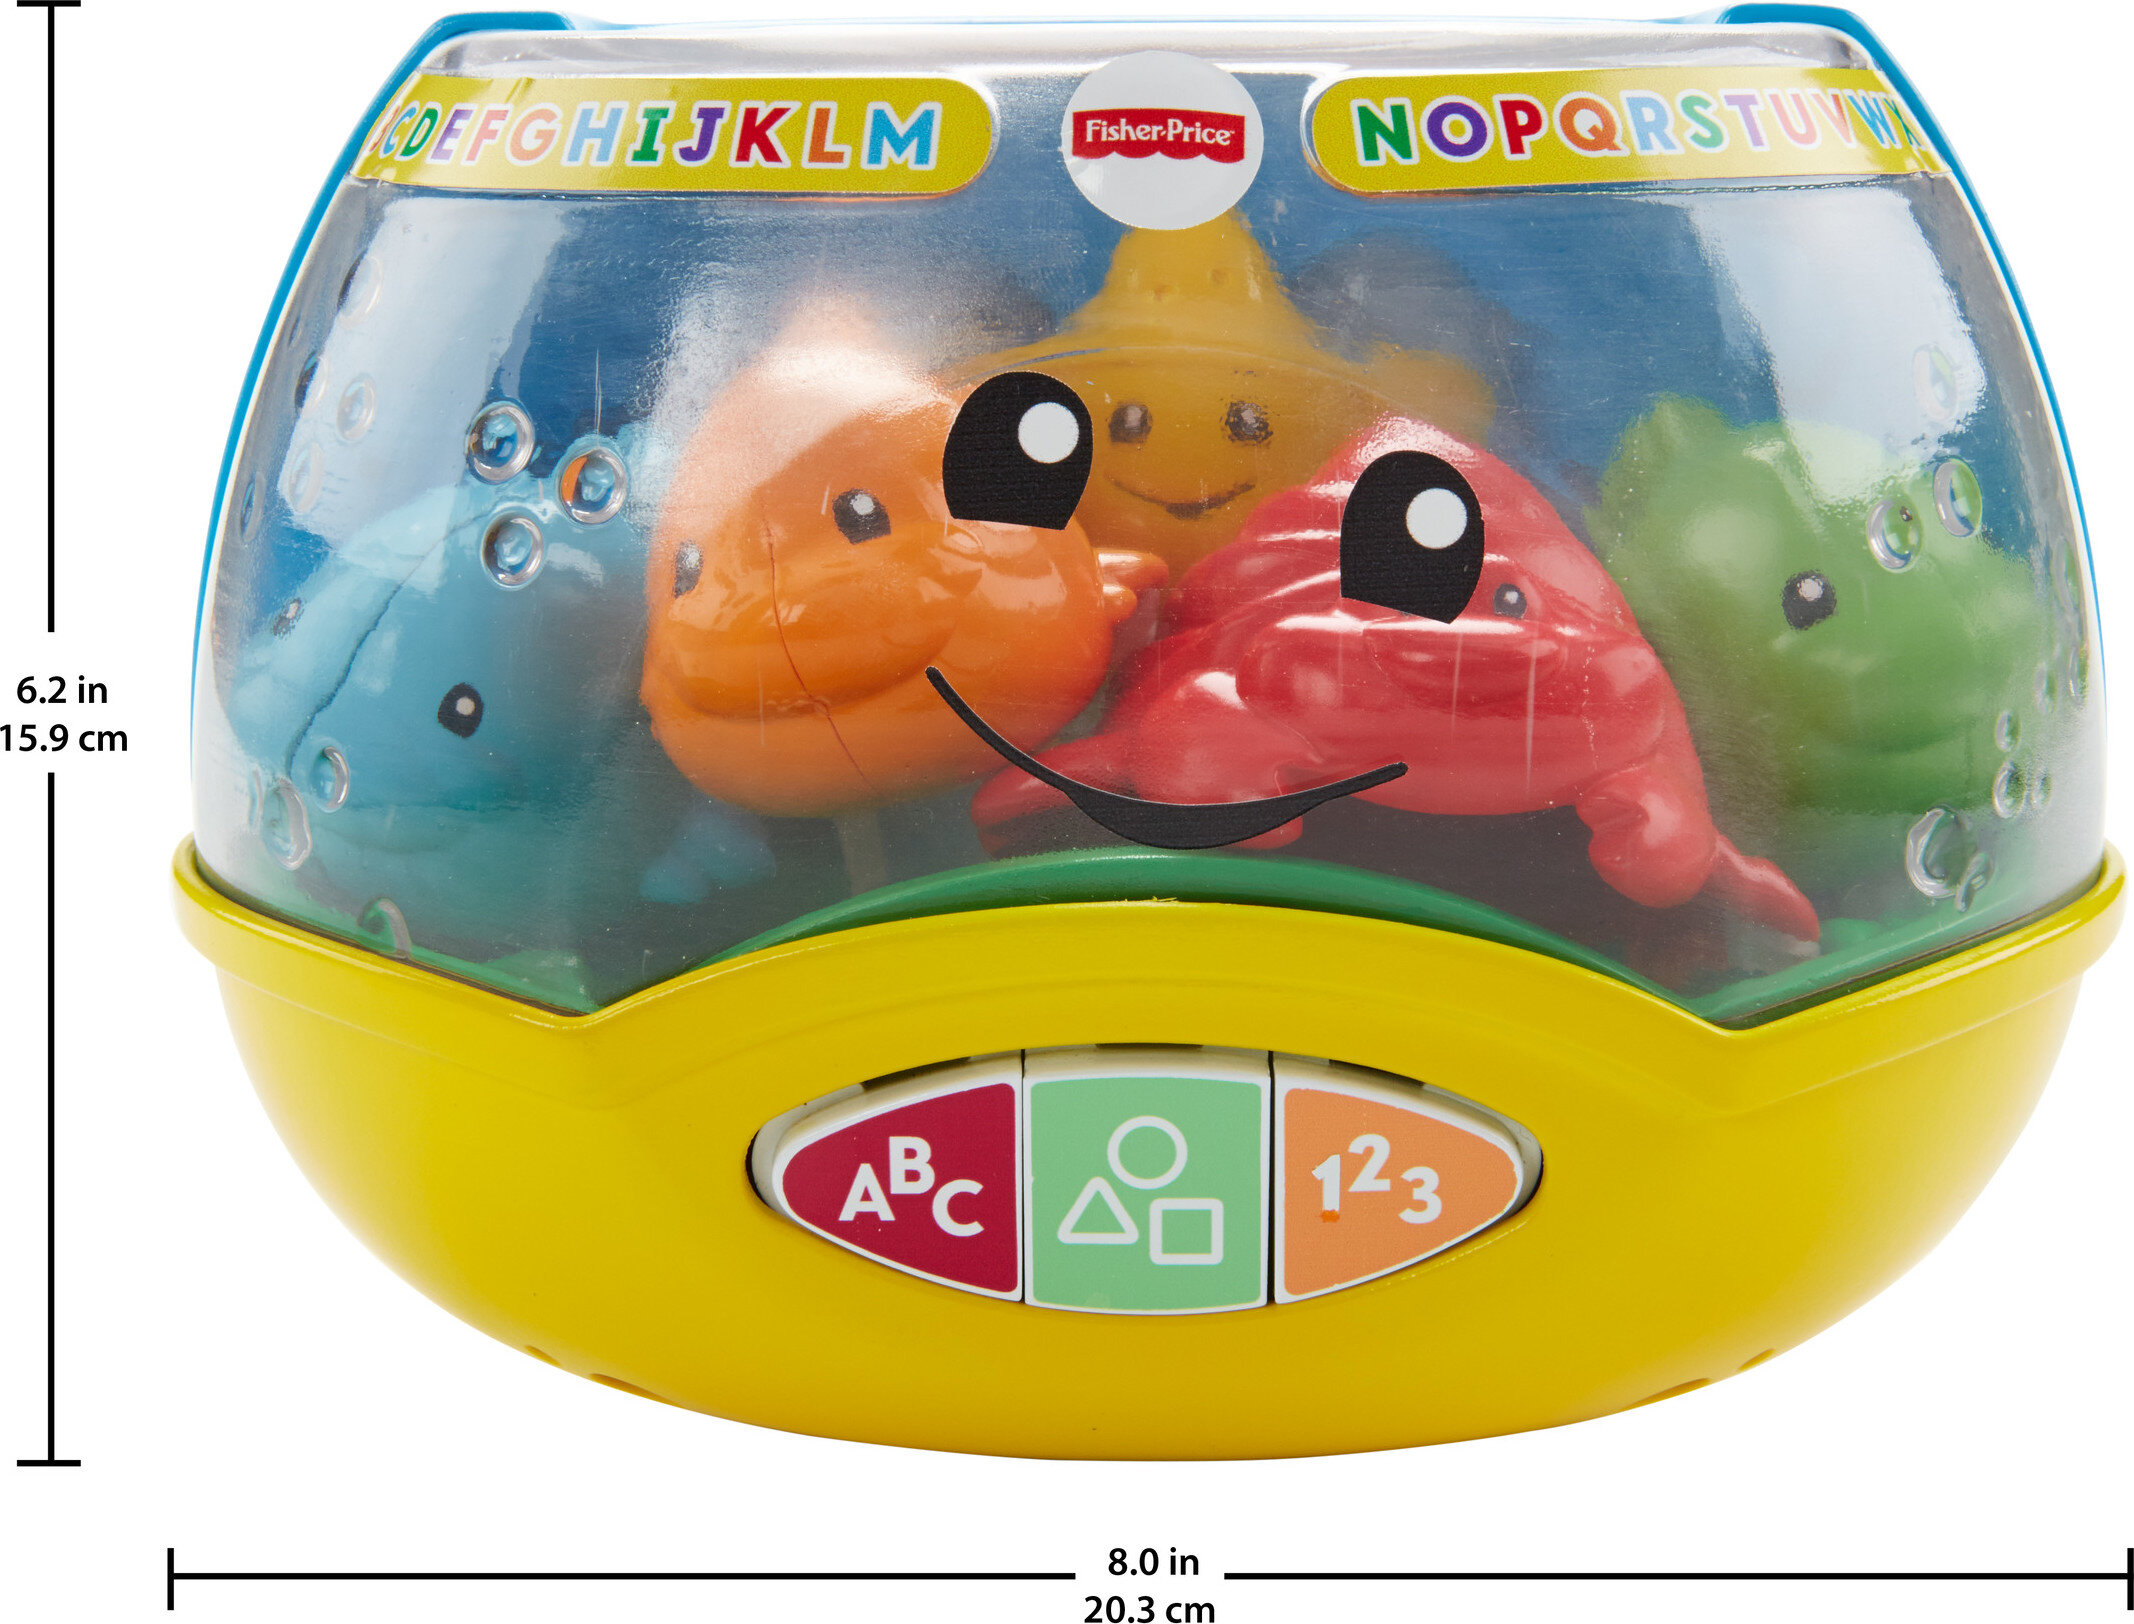 Fisher-Price Laugh & Learn Magical Lights Fishbowl Baby & Toddler Musical Learning Toy - image 4 of 7